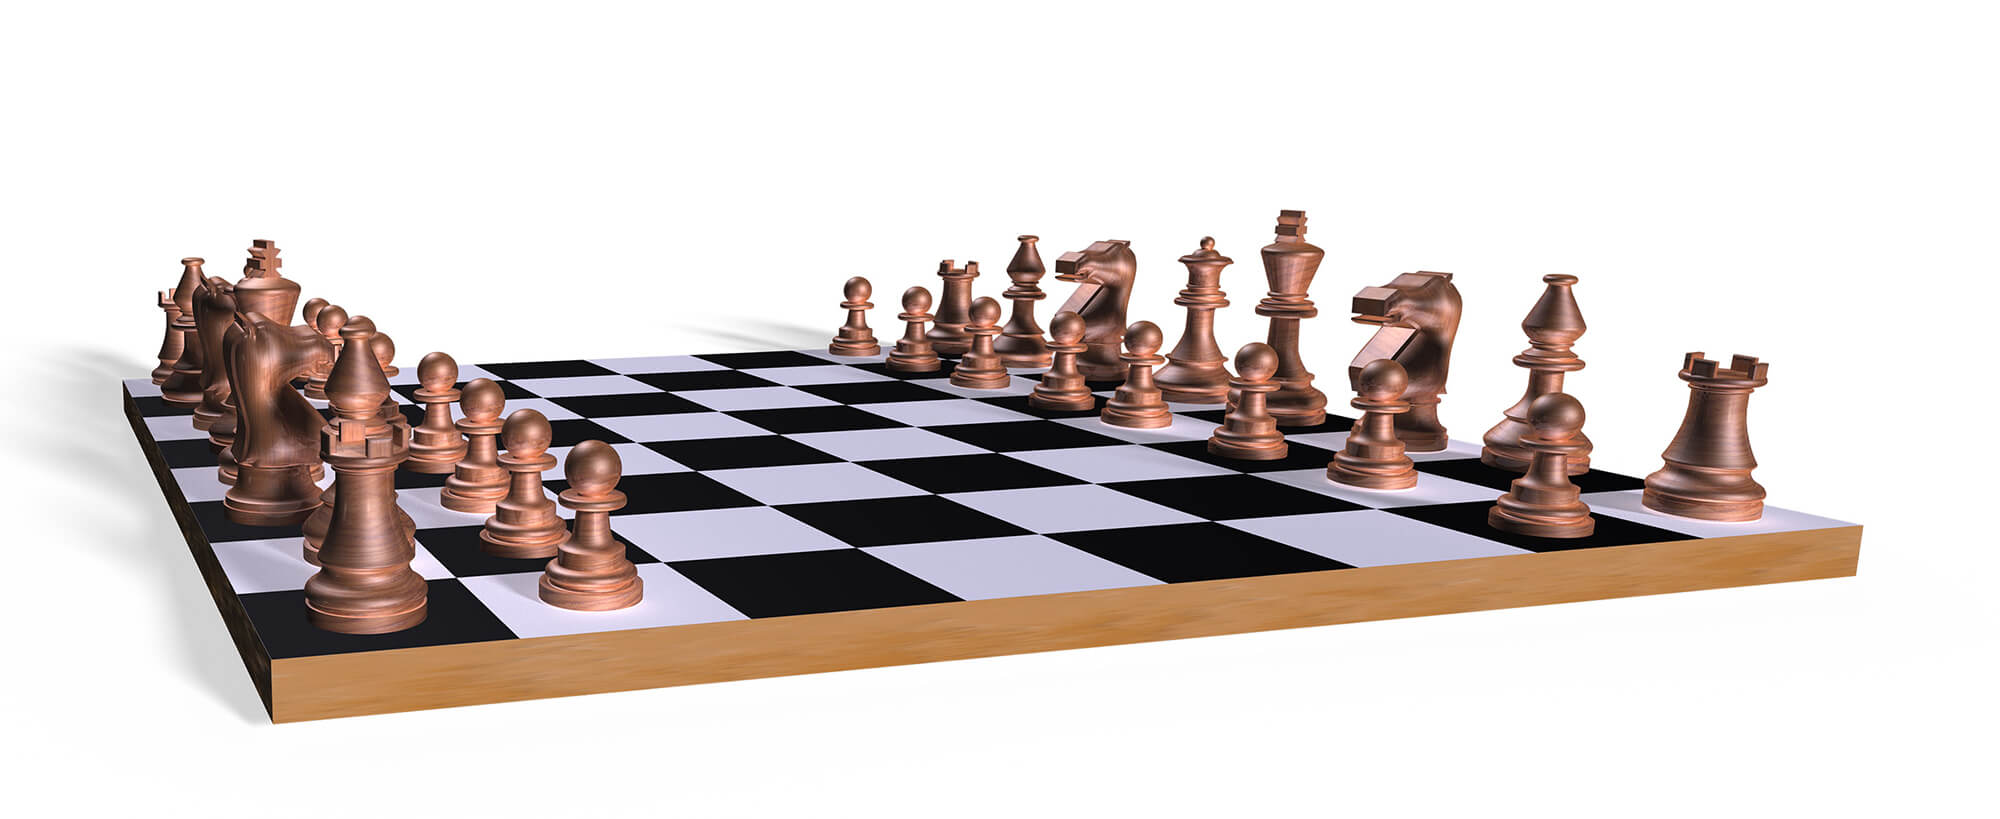 Photoshop 3D chess board